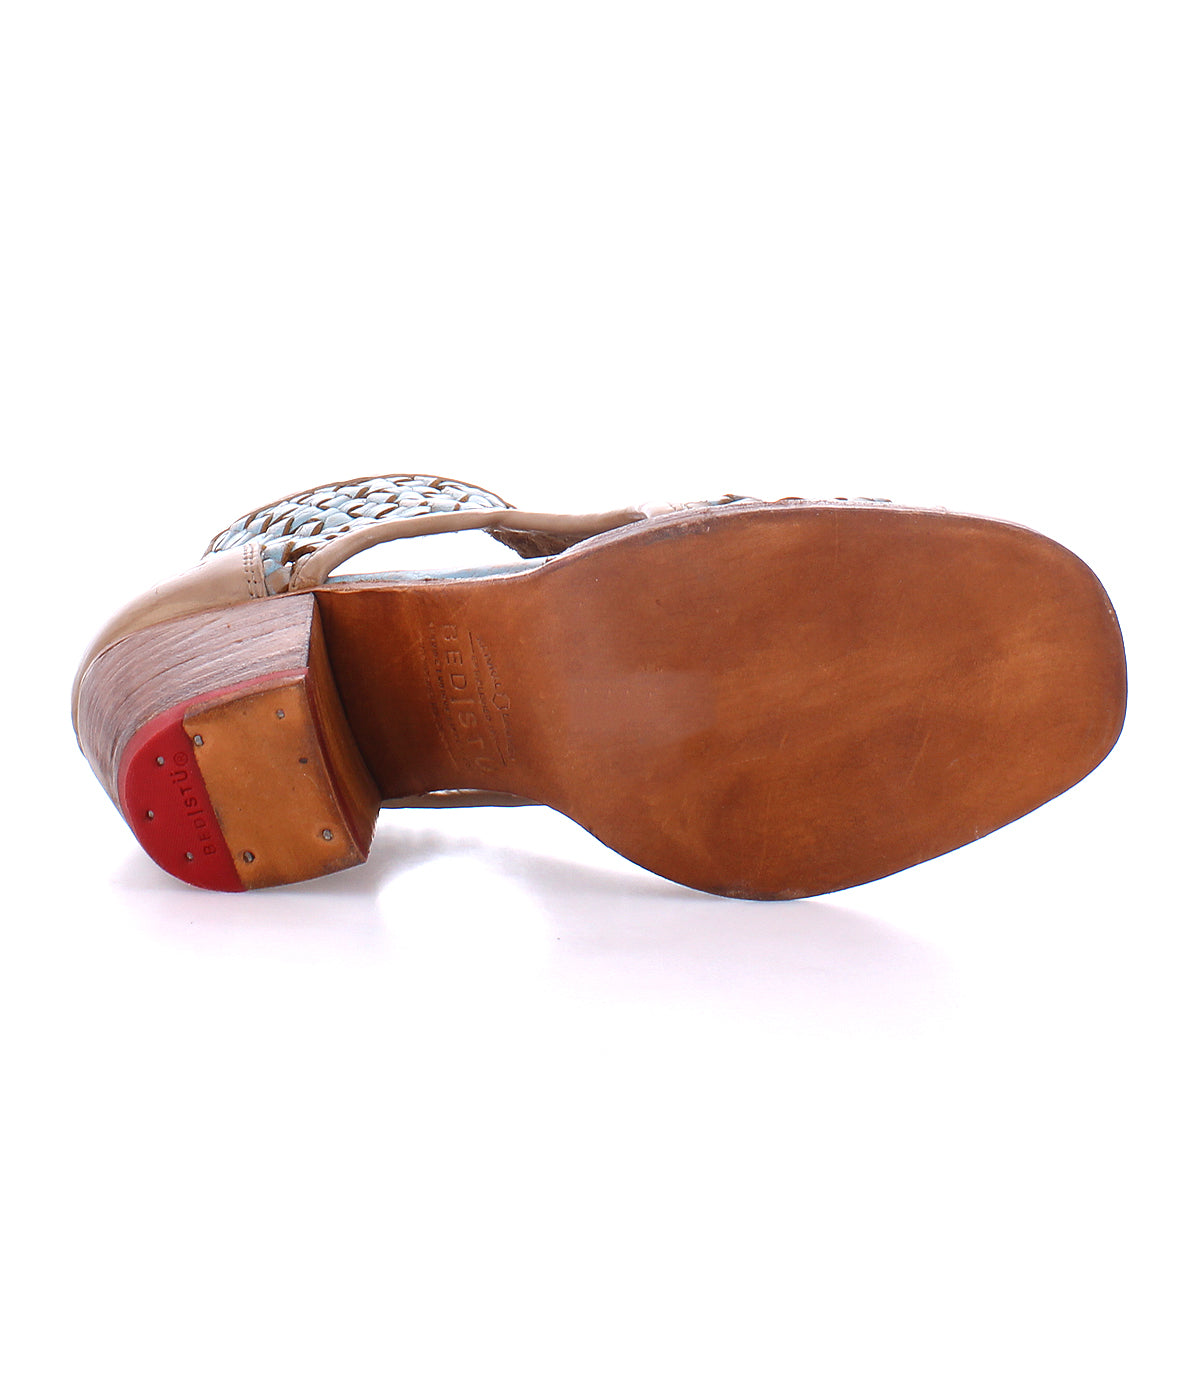 A single leather sandal with a decorative strap viewed from the sole side up, showcasing Bed Stu artisan craftsmanship.